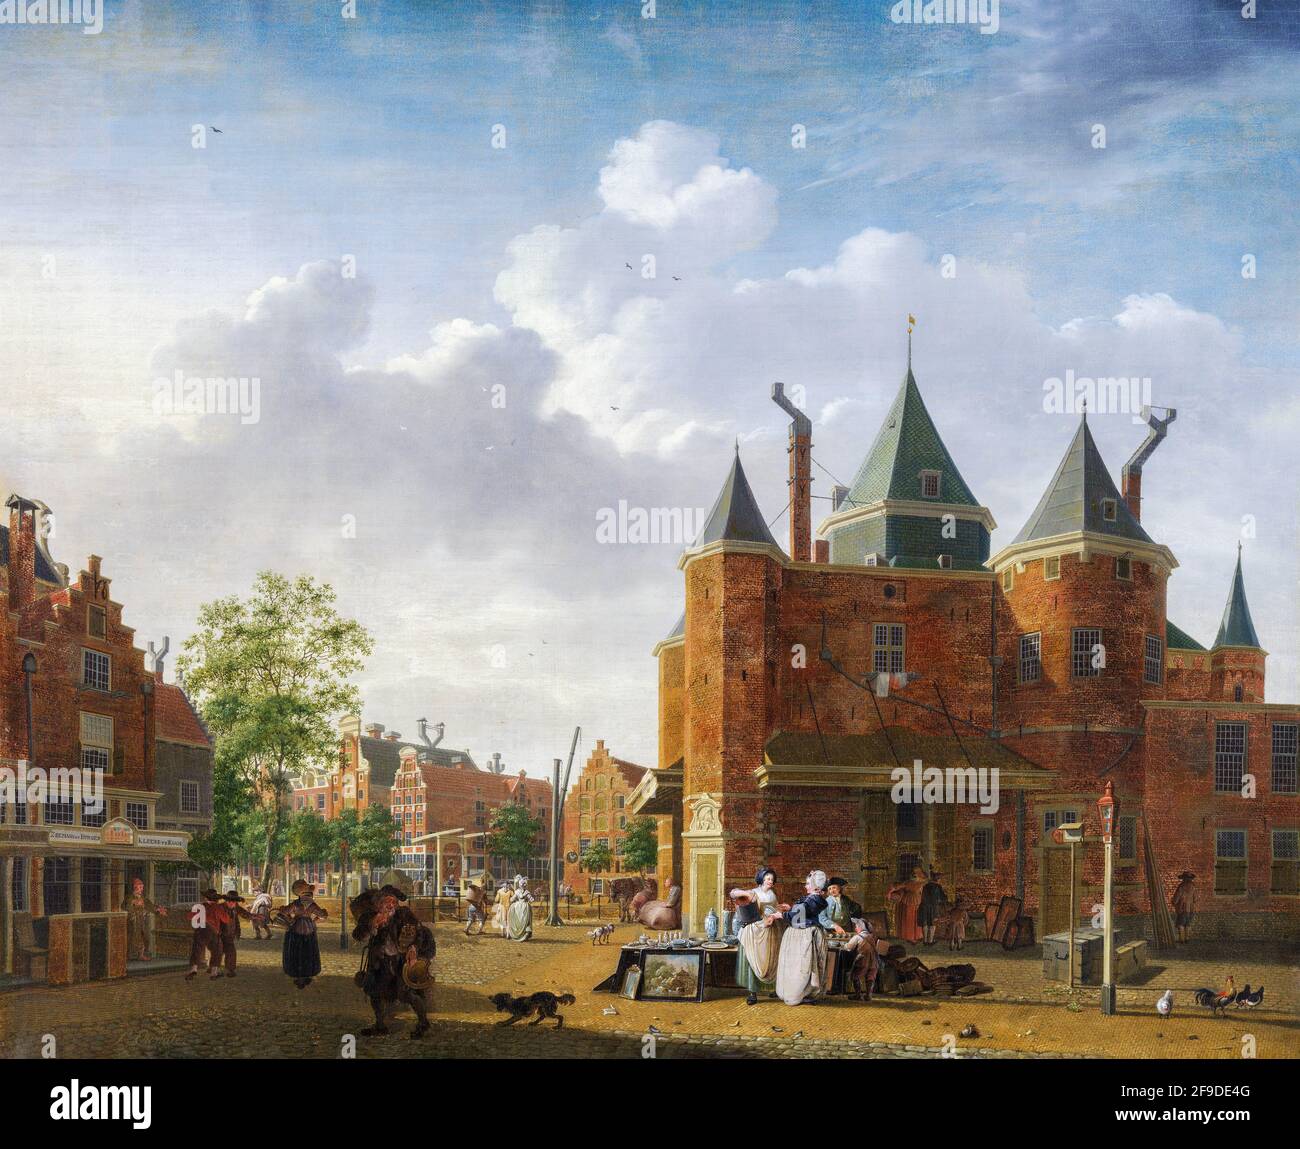 View of the Sint Antoniuswaag on the current Nieuwmarkt in Amsterdam. In front of the stall where antiques or household goods, including paintings, ar Stock Photo